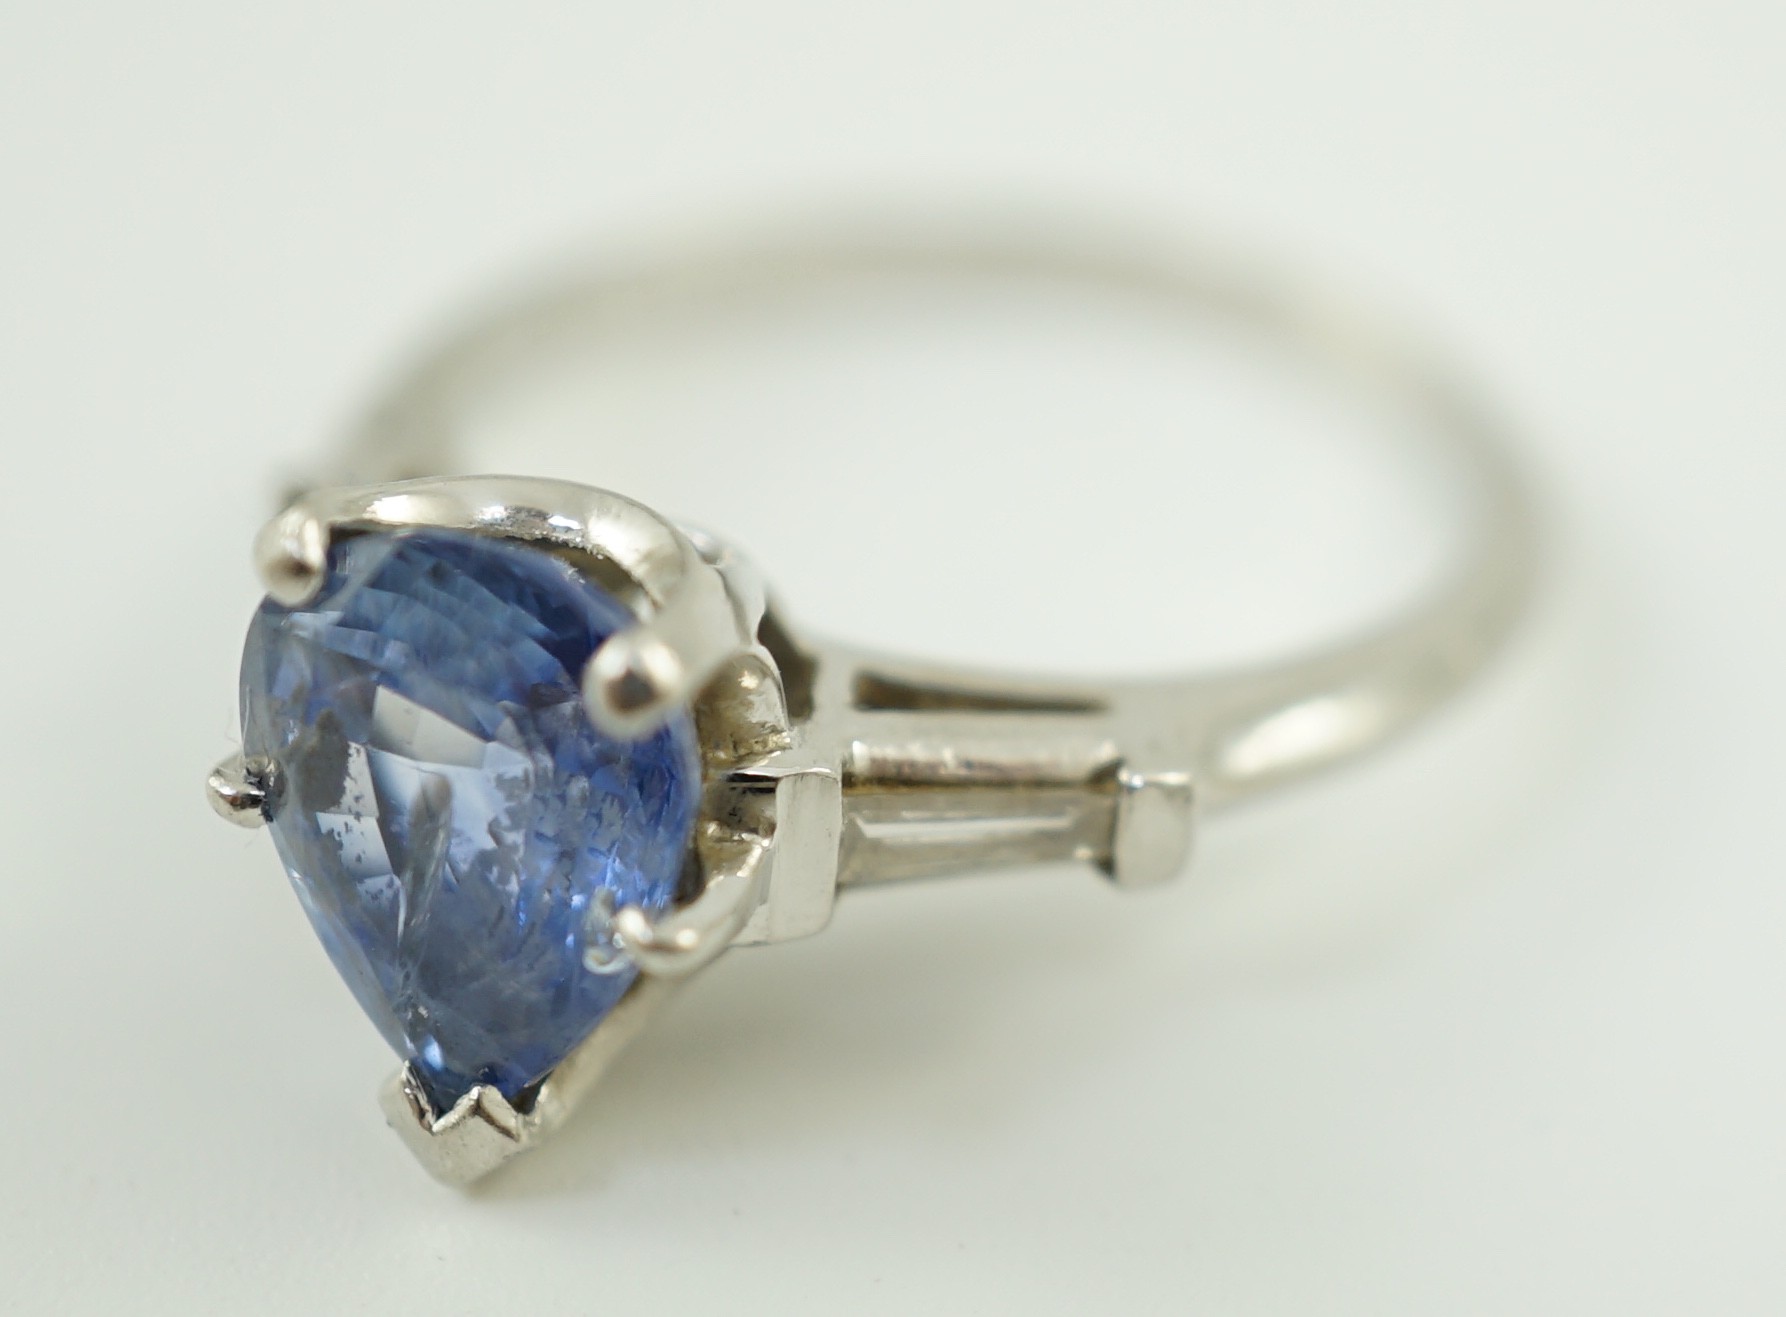 A platinum (10%) and single stone pear cut Ceylon sapphire set ring, with tapered baguette cut diamond set shoulders